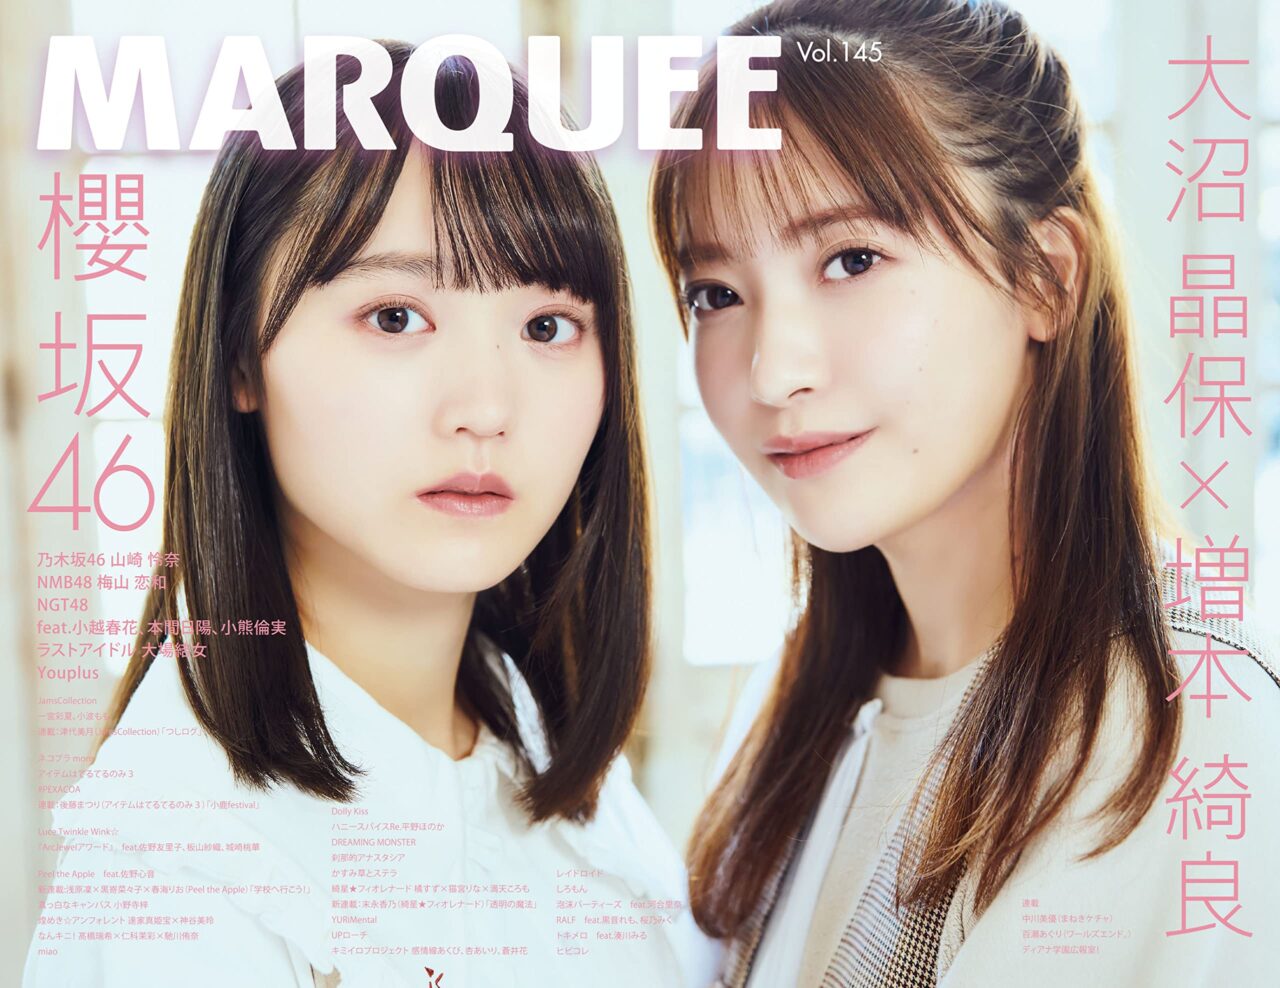 MARQUEE Vol.145